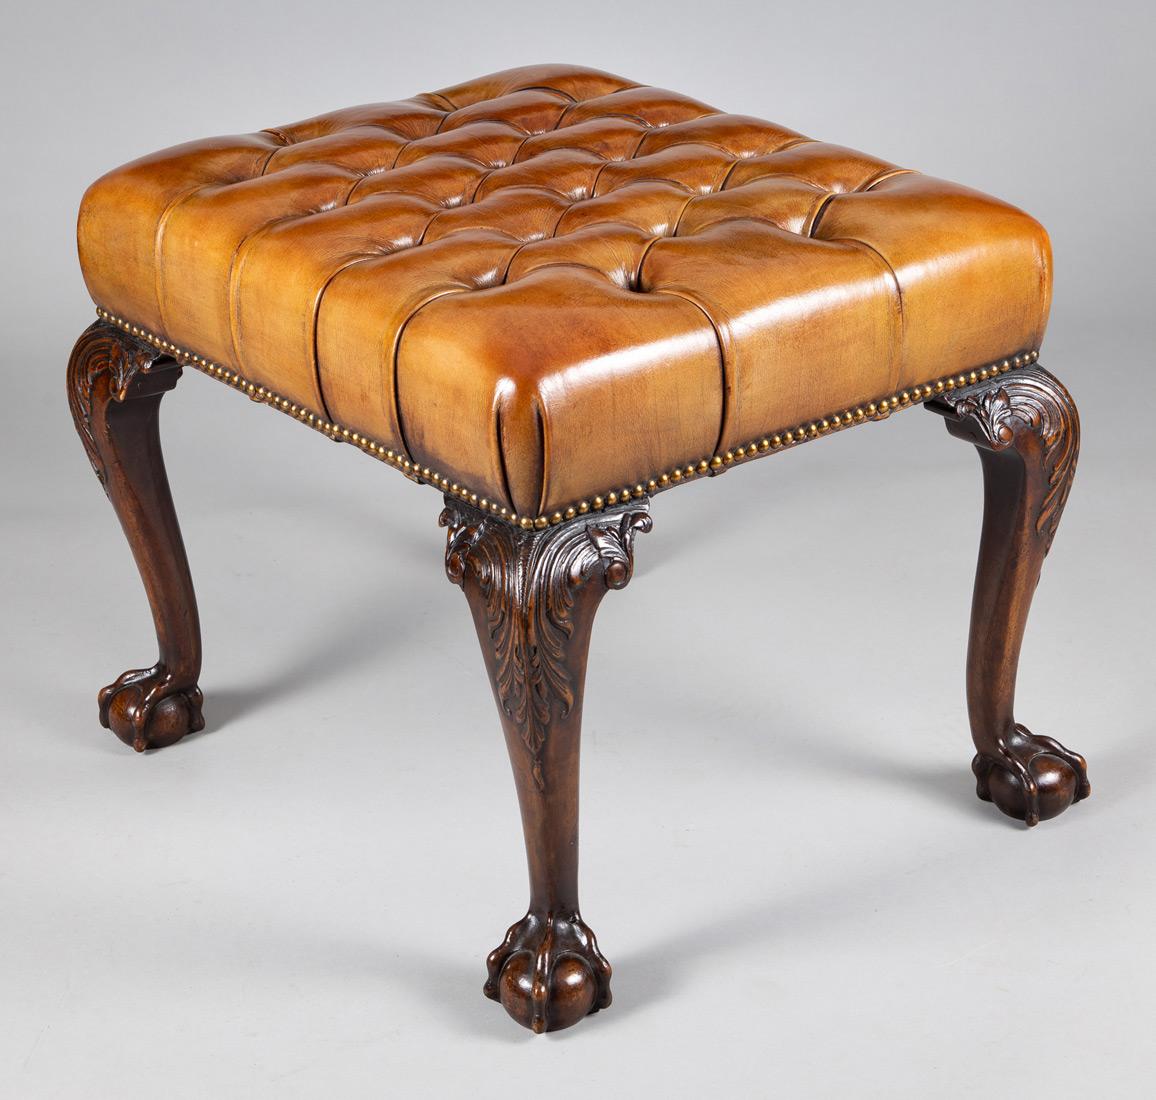 Georgian style mahogany stool upholstered in a cognac colored buttoned leather, supported on cabriole legs, the knees carved with acanthus leaves, ending in ball and claw feet. The leather is finished with brass nailheads.